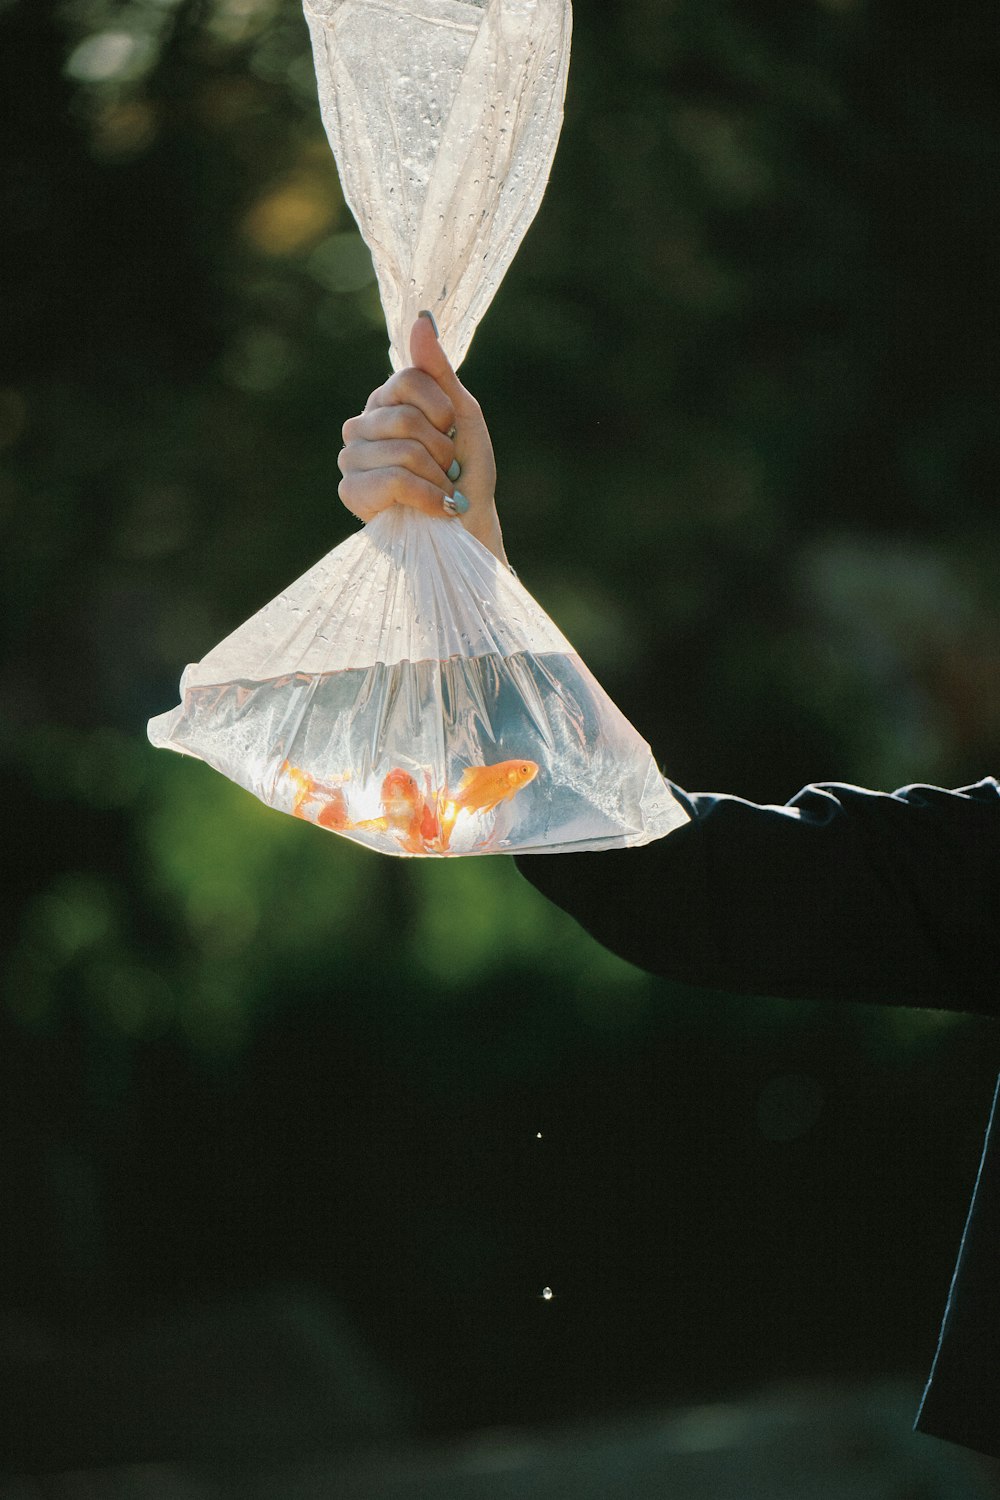 a person holding a plastic bag with goldfish in it